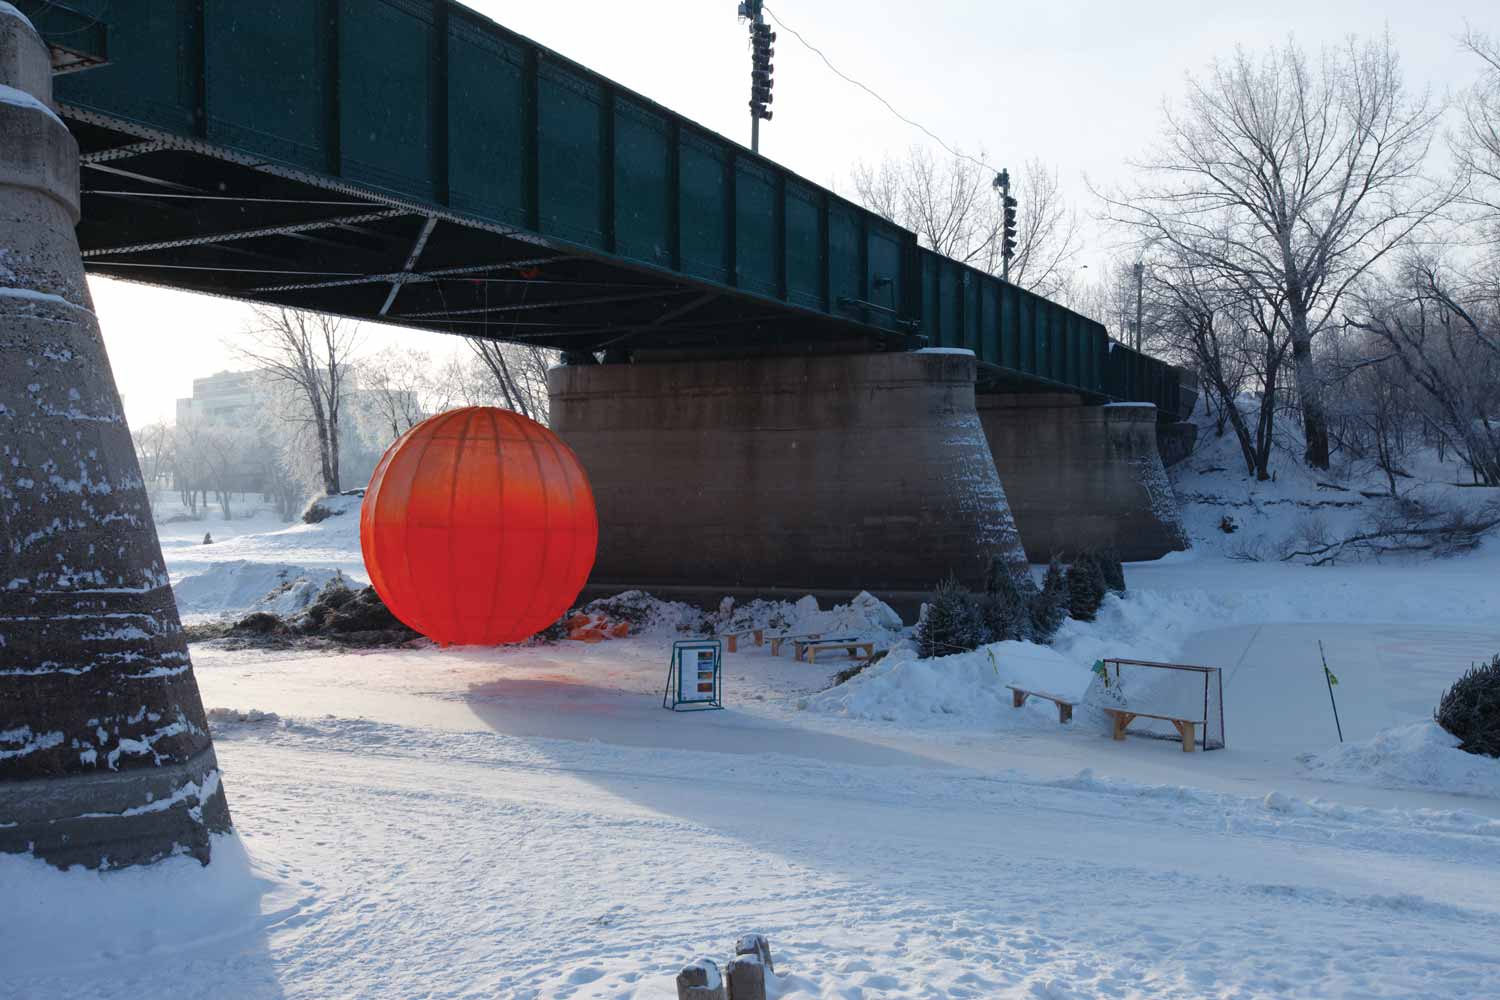 A large orb made of red fabric on a metal frame hangs underneath The Forks Historic Rail Bridge over the skating trail.